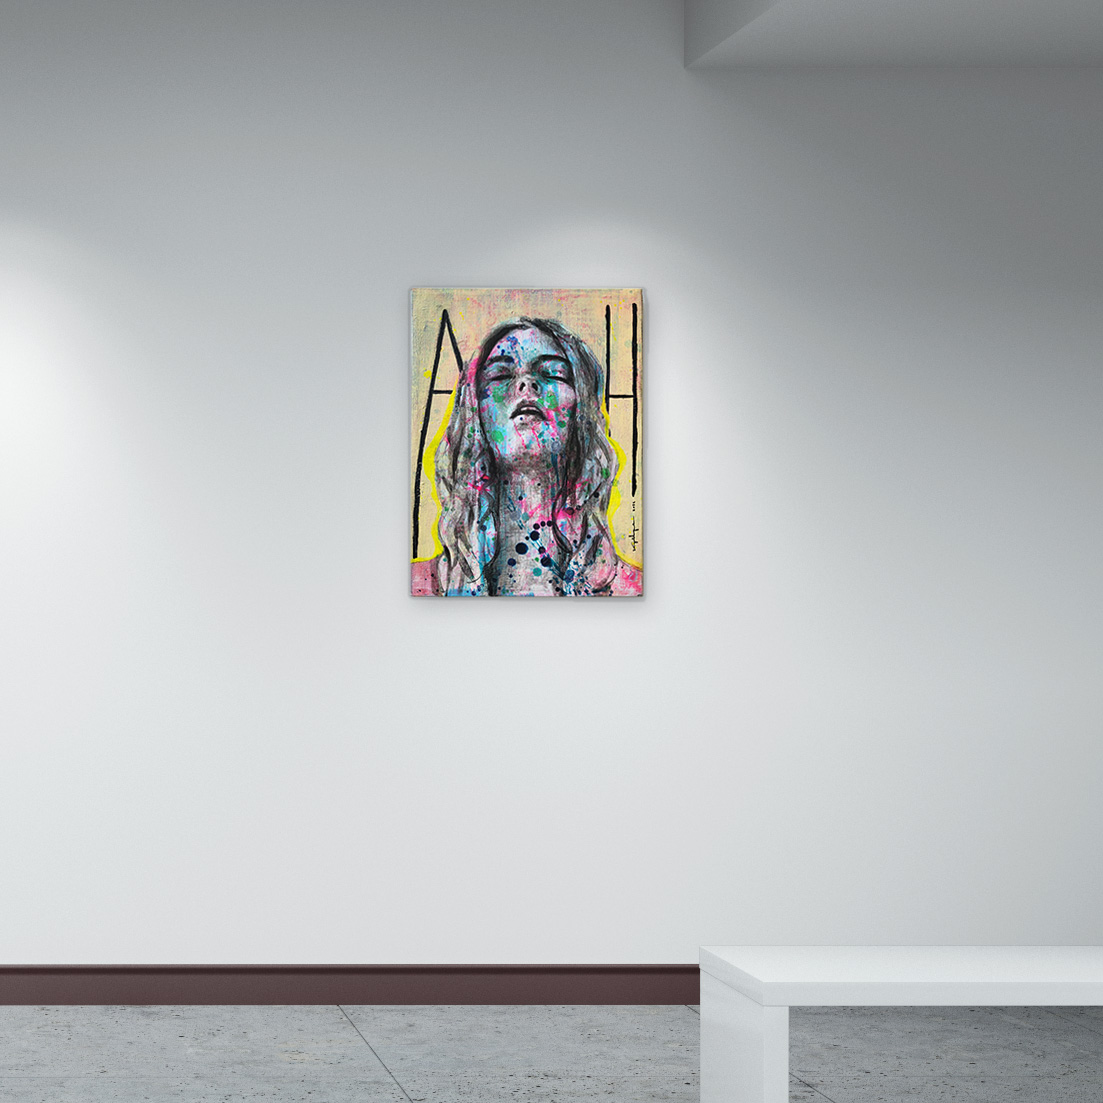 The painting 'Aaaah' in the gallery